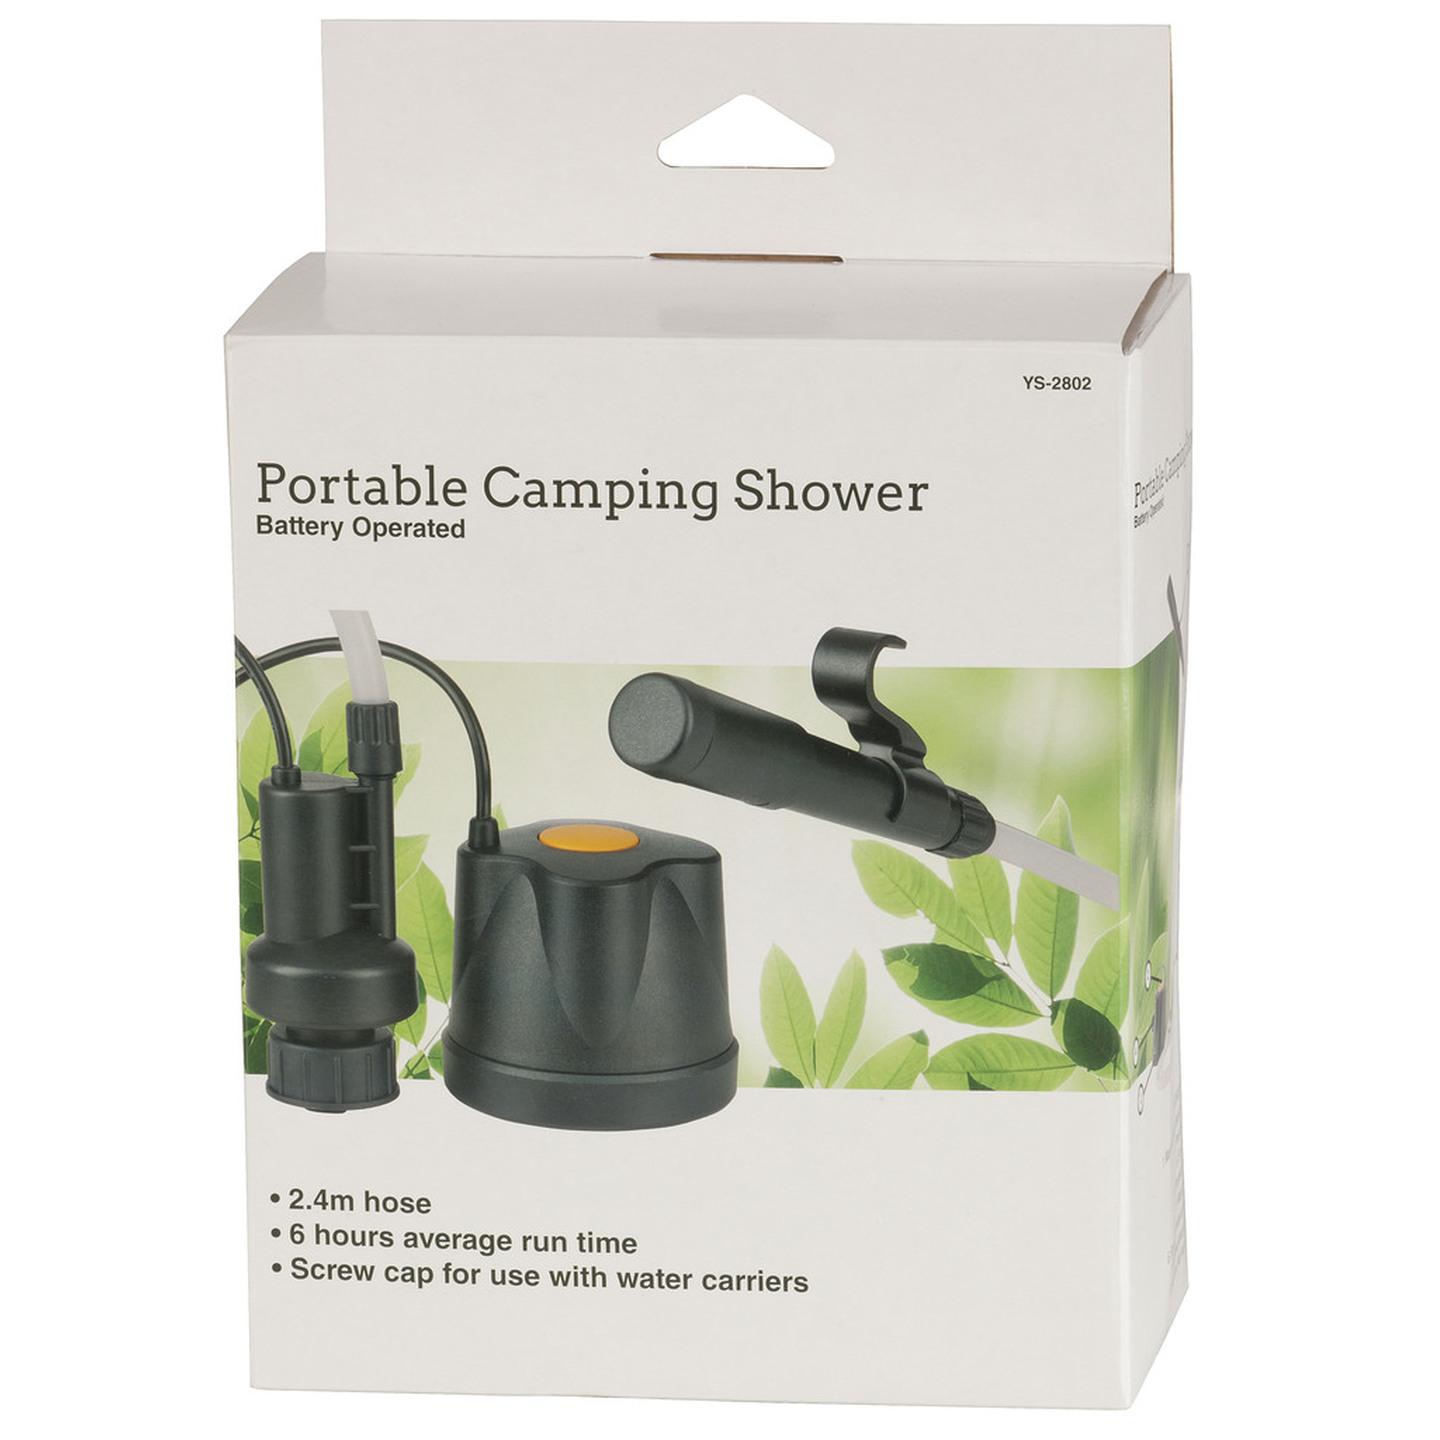 Portable Camping Shower - Battery Operated